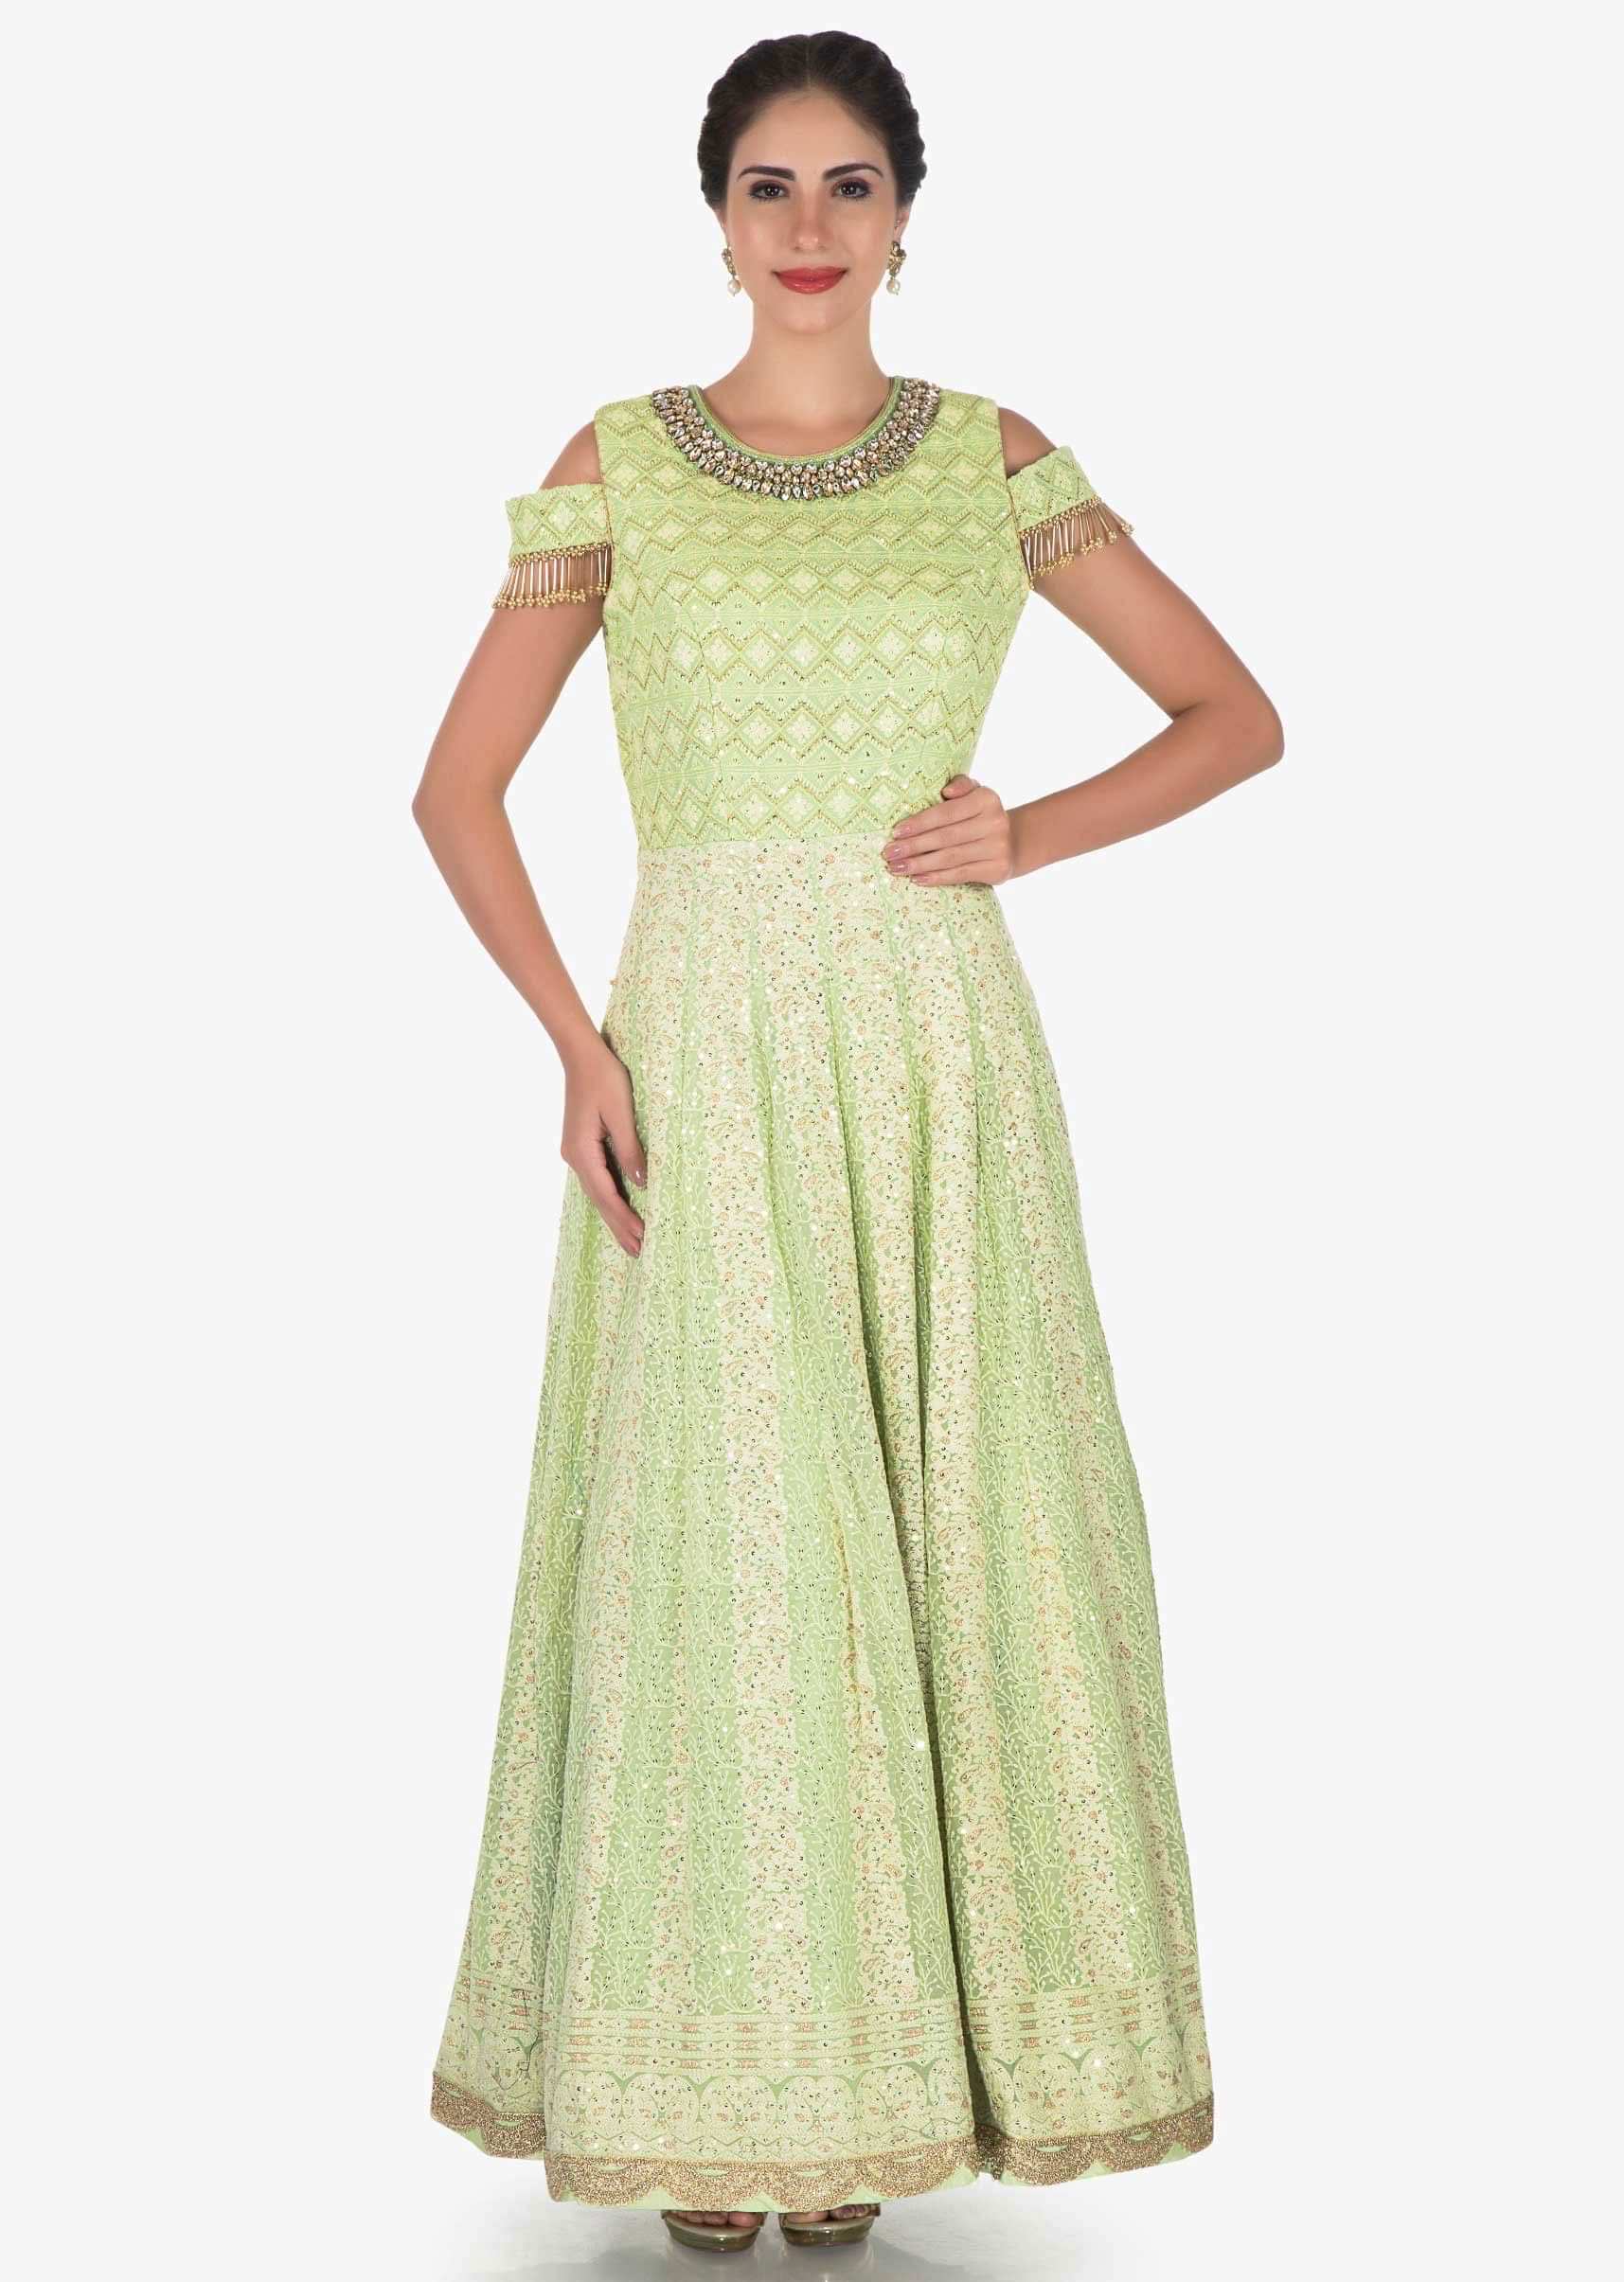 Pista Green Suit In Georgette Embellished In Heavy Stone And Tassel Embroidery Work Online - Kalki Fashion